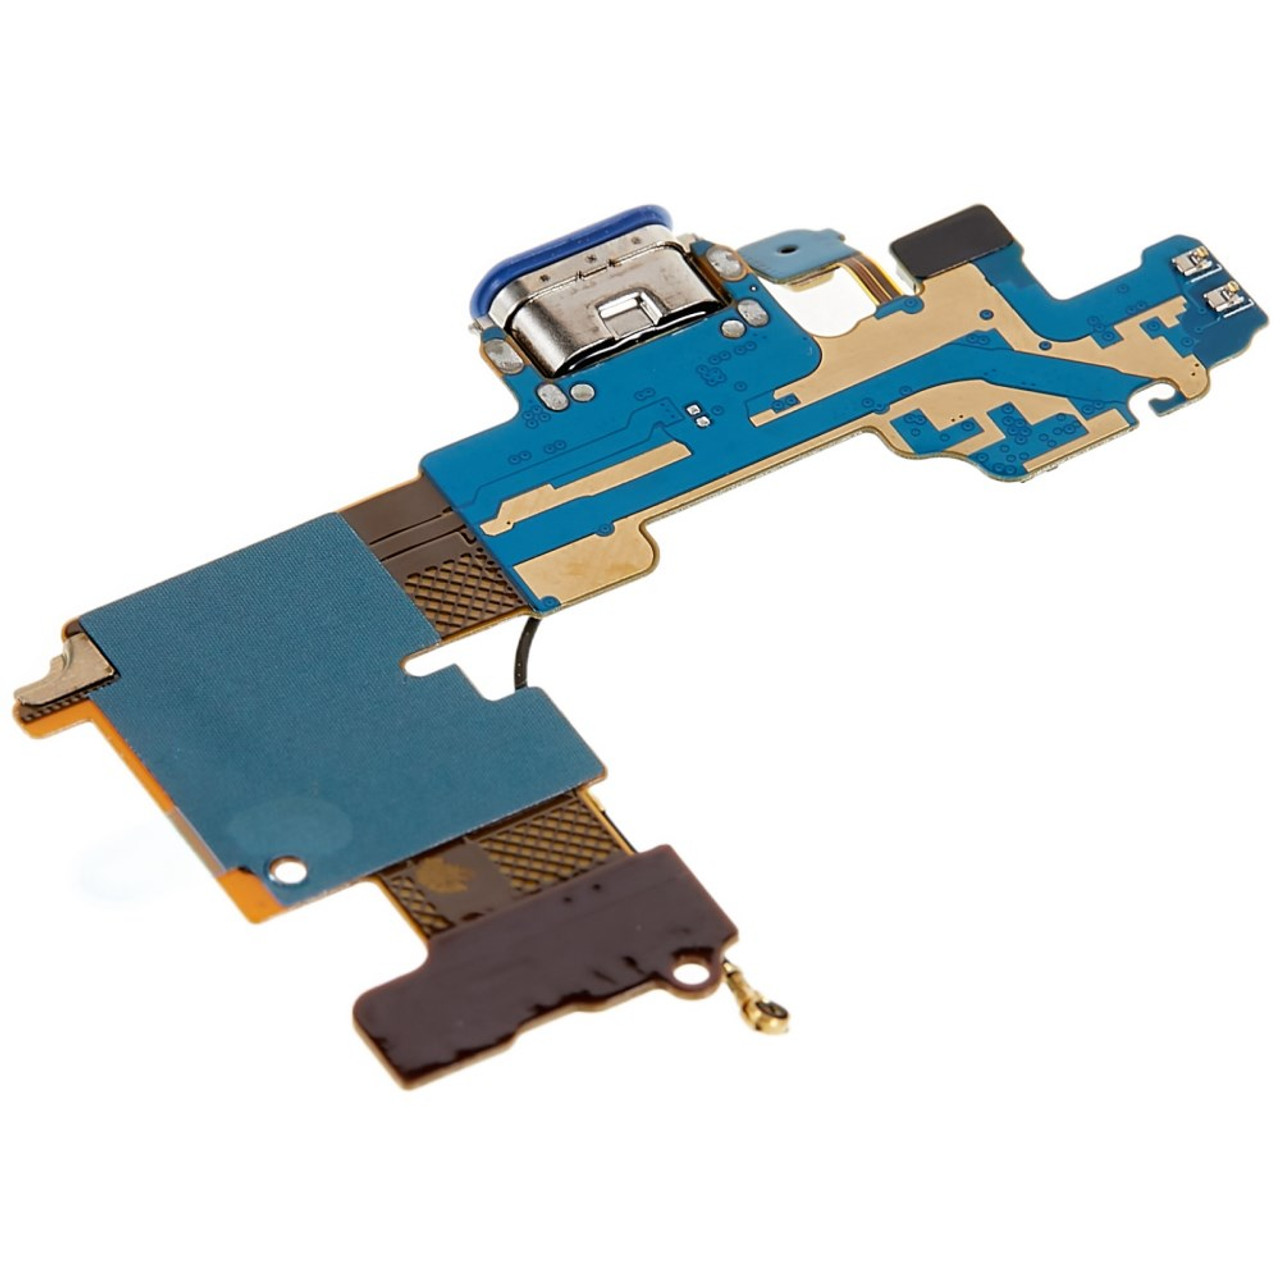 OEM Charger Charging Port Dock Flex Cable Replacement Part For